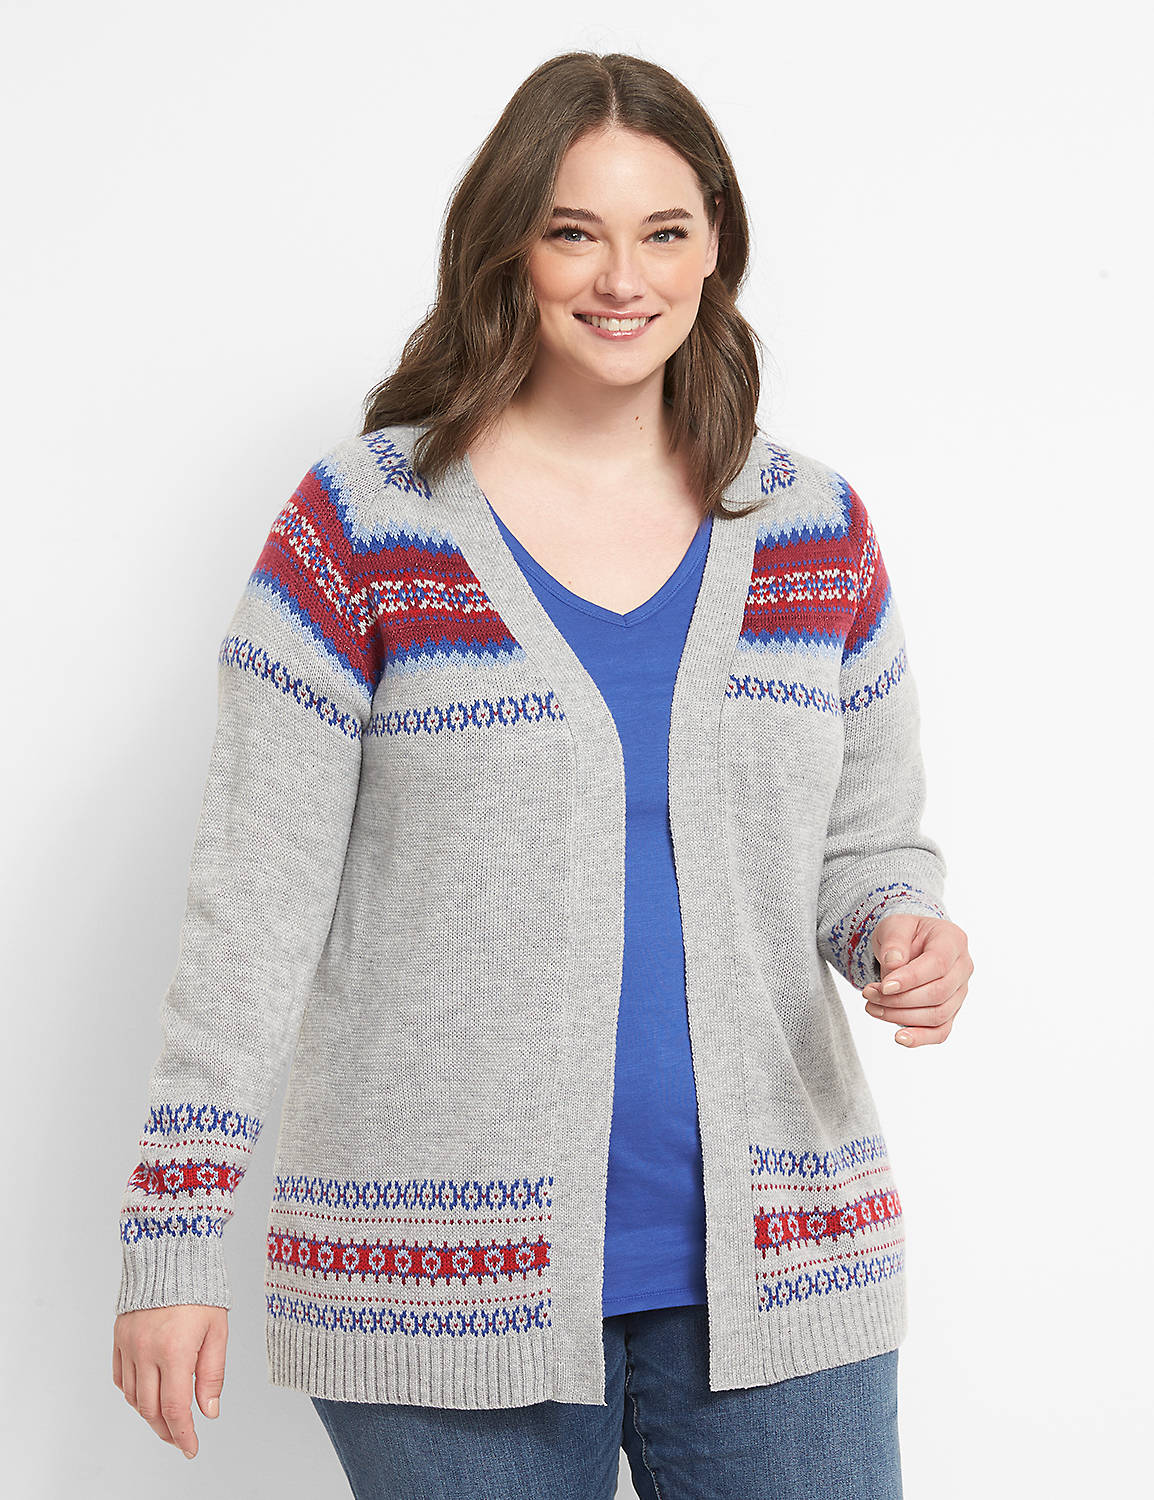 Long Sleeve Open Front Placed Fairisle Overpiece 1124478:BC04 Heather grey:10/12 Product Image 1